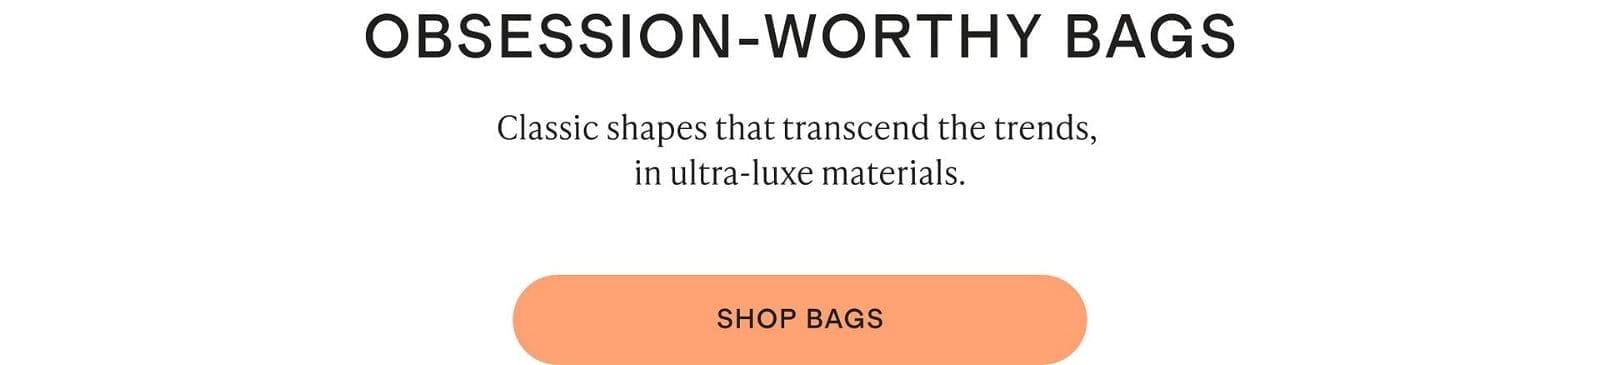 OBSESSION-WORTHY BAGS